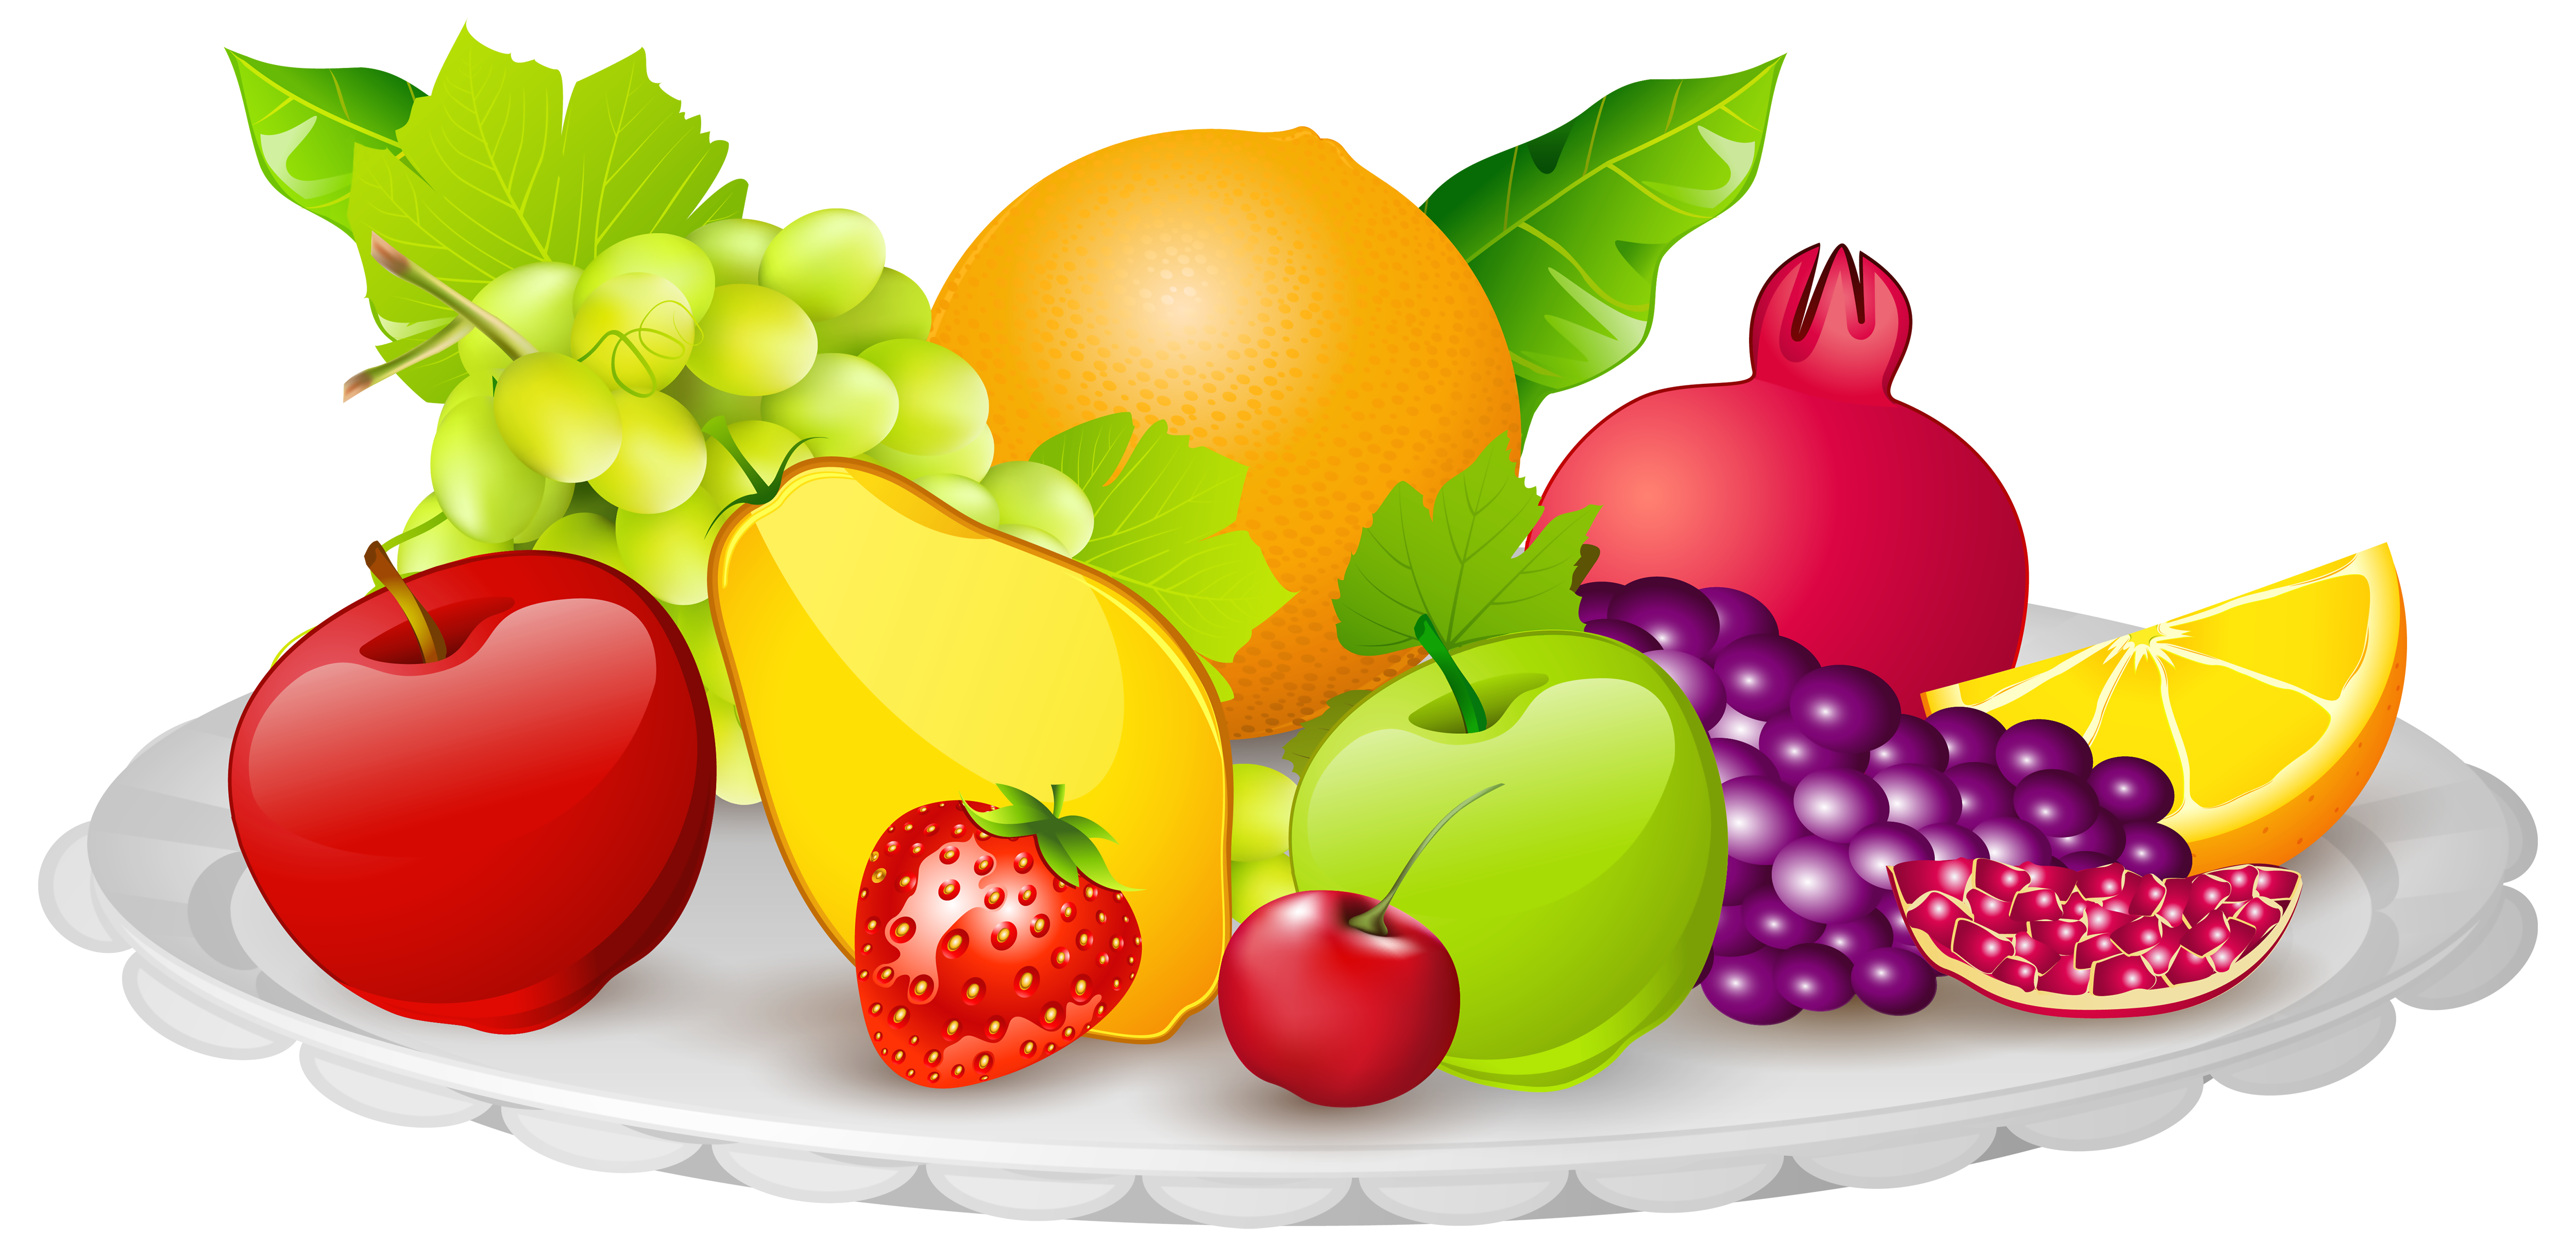 Plate with Fruits PNG Clipart Image.